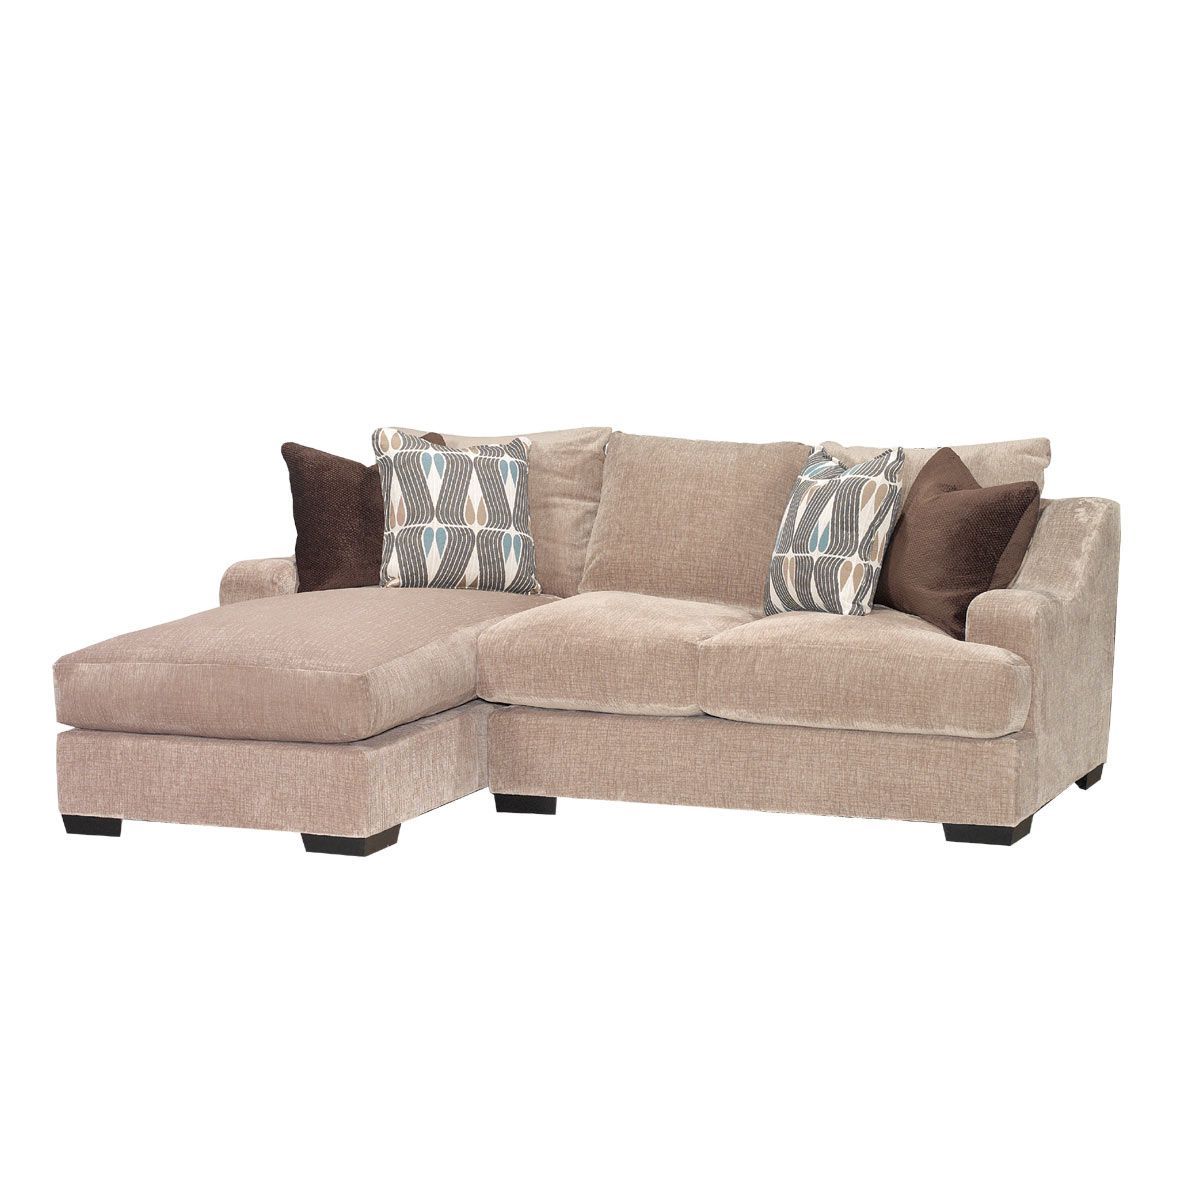 Stone Brown Casual Contemporary 2 Piece Sectional In 2pc Maddox Left Arm Facing Sectional Sofas With Chaise Brown (View 4 of 15)